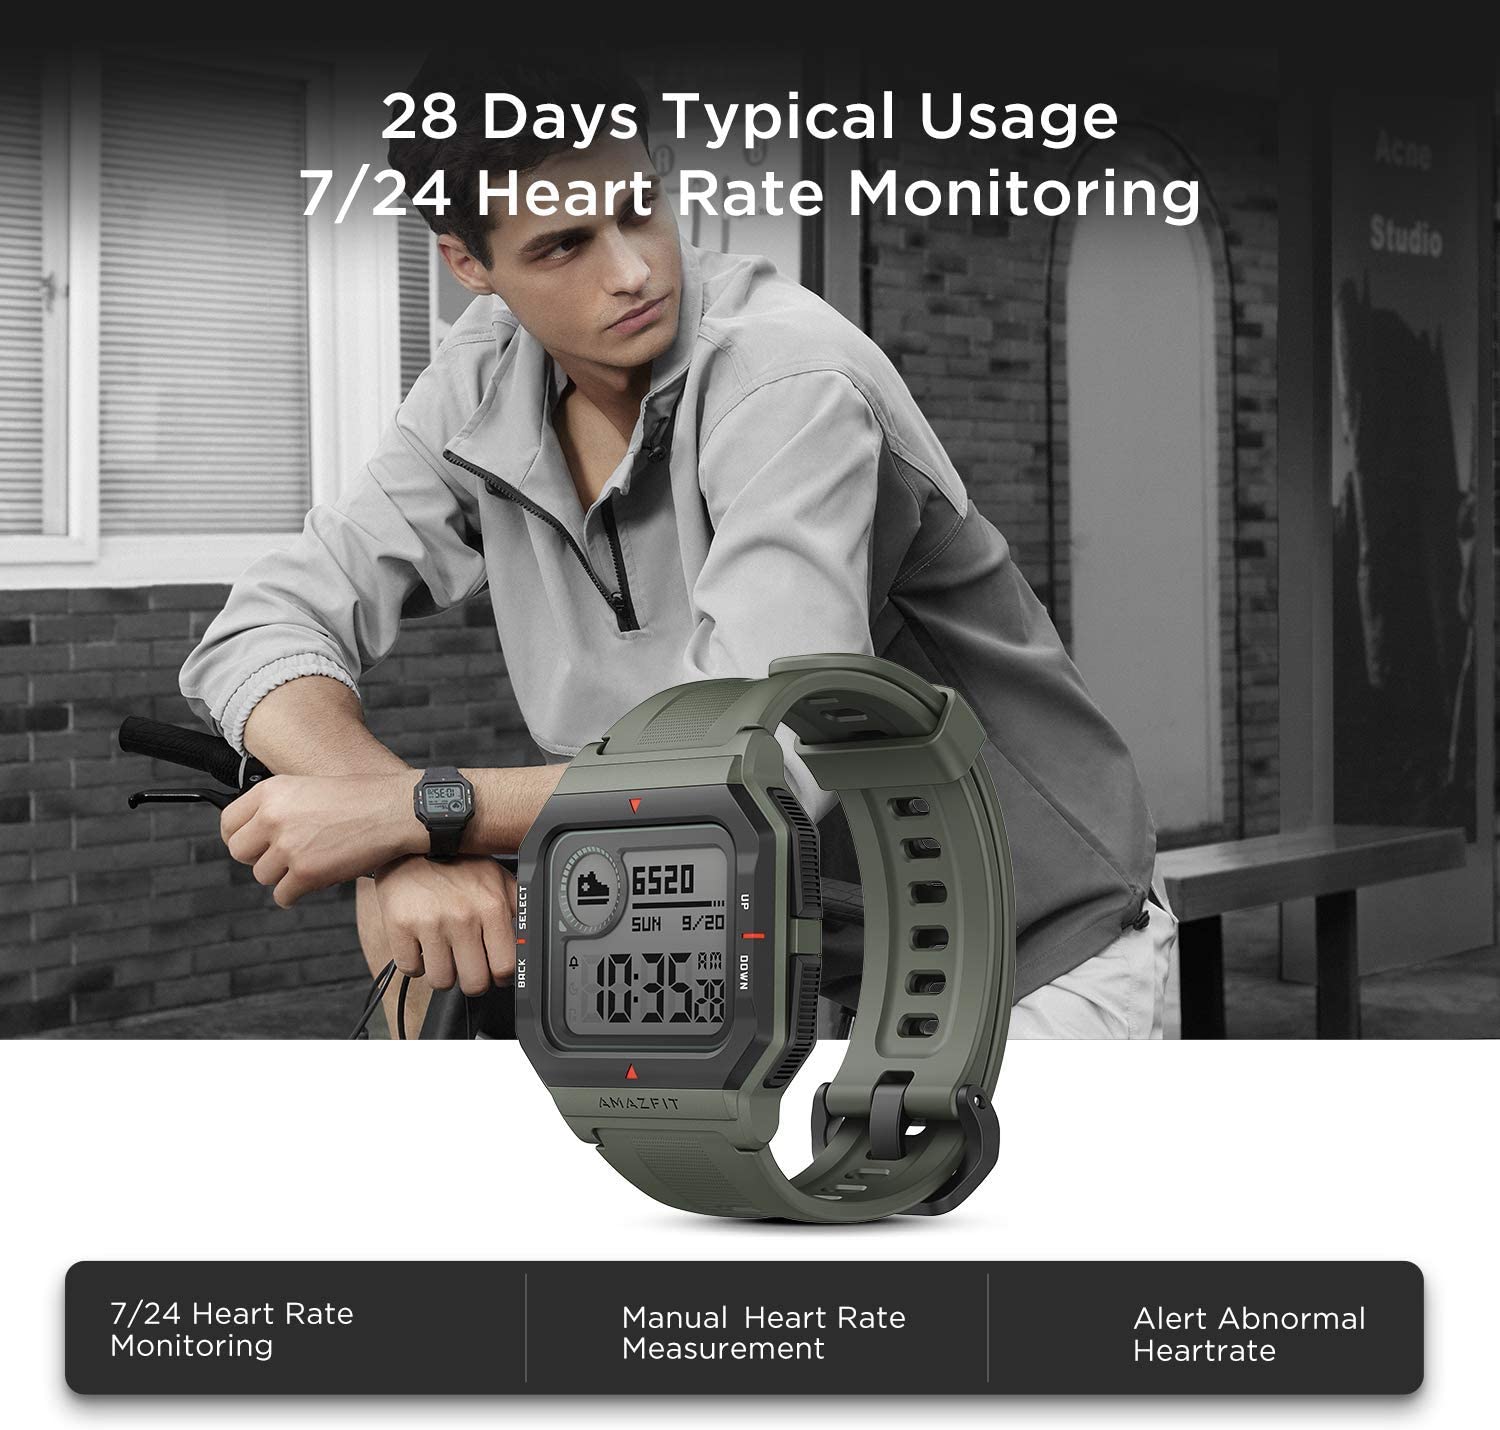 Amazfit Neo Fitness Retro Smartwatch with Real-Time Workout Tracking, Heart Rate and Sleep Monitoring, 28-Day Battery Life, Smart Notifications, 1.2" Always-On Display, Water Resistant, Green